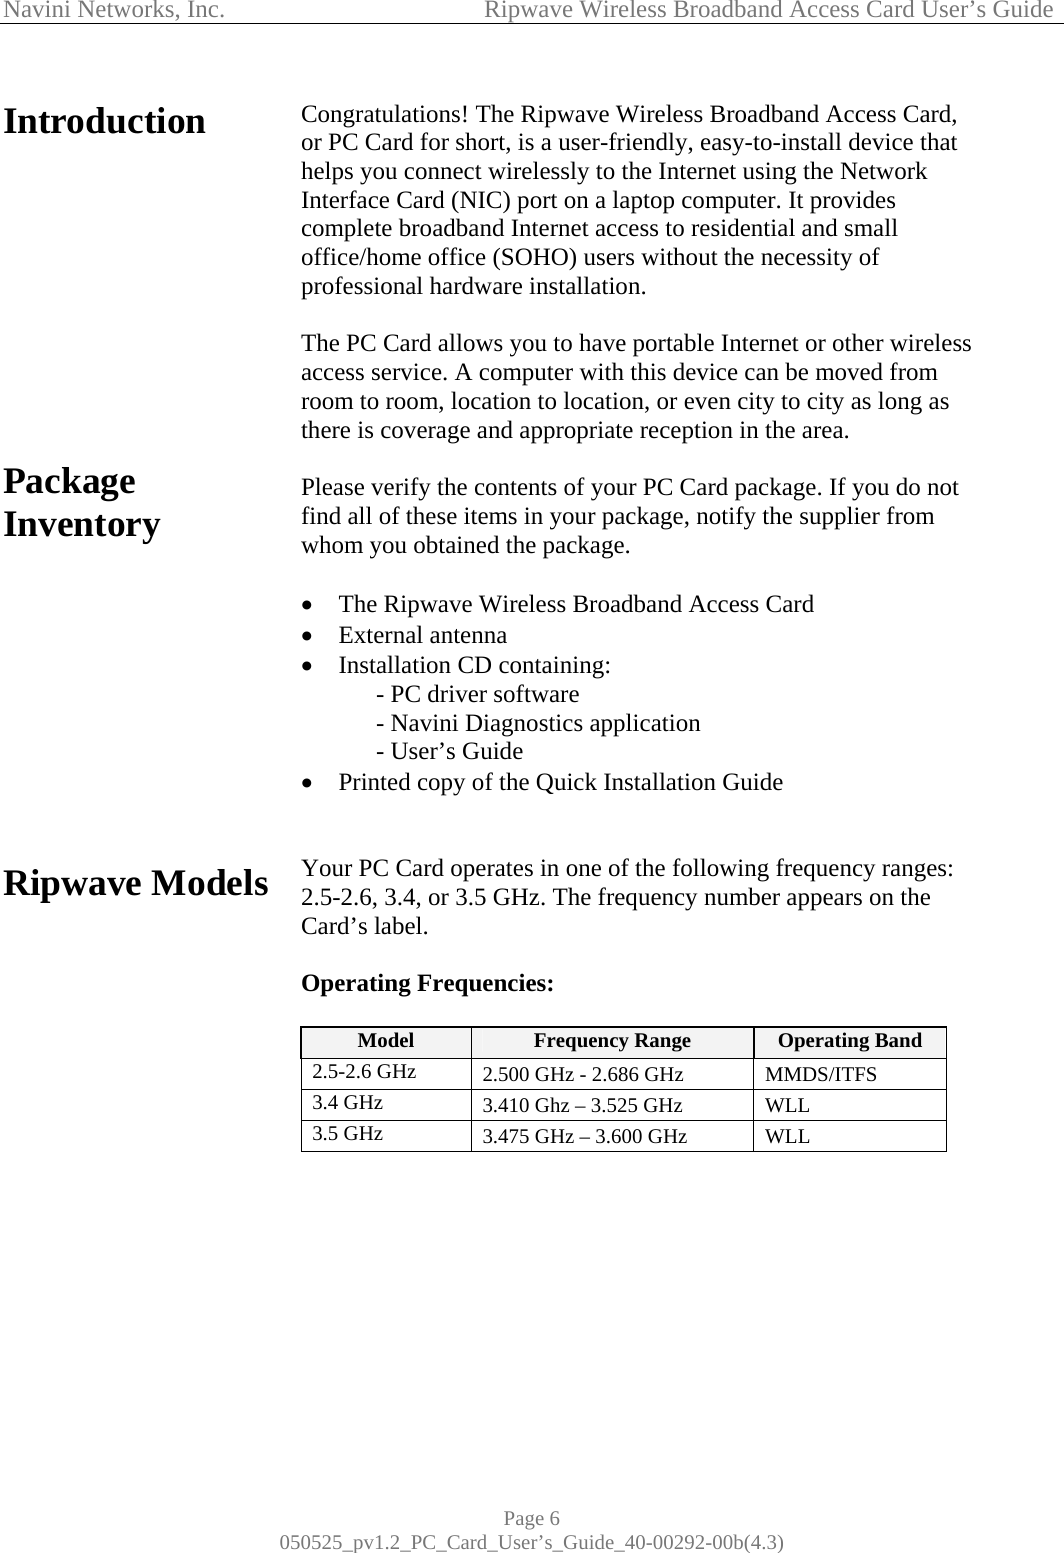 Navini Networks, Inc.            Ripwave Wireless Broadband Access Card User’s Guide Page 6 050525_pv1.2_PC_Card_User’s_Guide_40-00292-00b(4.3) Introduction            Package Inventory            Ripwave Models                  Congratulations! The Ripwave Wireless Broadband Access Card, or PC Card for short, is a user-friendly, easy-to-install device that helps you connect wirelessly to the Internet using the Network Interface Card (NIC) port on a laptop computer. It provides complete broadband Internet access to residential and small office/home office (SOHO) users without the necessity of professional hardware installation.   The PC Card allows you to have portable Internet or other wireless access service. A computer with this device can be moved from room to room, location to location, or even city to city as long as there is coverage and appropriate reception in the area.  Please verify the contents of your PC Card package. If you do not find all of these items in your package, notify the supplier from whom you obtained the package.  •  The Ripwave Wireless Broadband Access Card  •  External antenna •  Installation CD containing:   - PC driver software   - Navini Diagnostics application    - User’s Guide  •  Printed copy of the Quick Installation Guide   Your PC Card operates in one of the following frequency ranges: 2.5-2.6, 3.4, or 3.5 GHz. The frequency number appears on the Card’s label.  Operating Frequencies:   Model  Frequency Range  Operating Band 2.5-2.6 GHz  2.500 GHz - 2.686 GHz  MMDS/ITFS 3.4 GHz  3.410 Ghz – 3.525 GHz  WLL 3.5 GHz  3.475 GHz – 3.600 GHz  WLL          